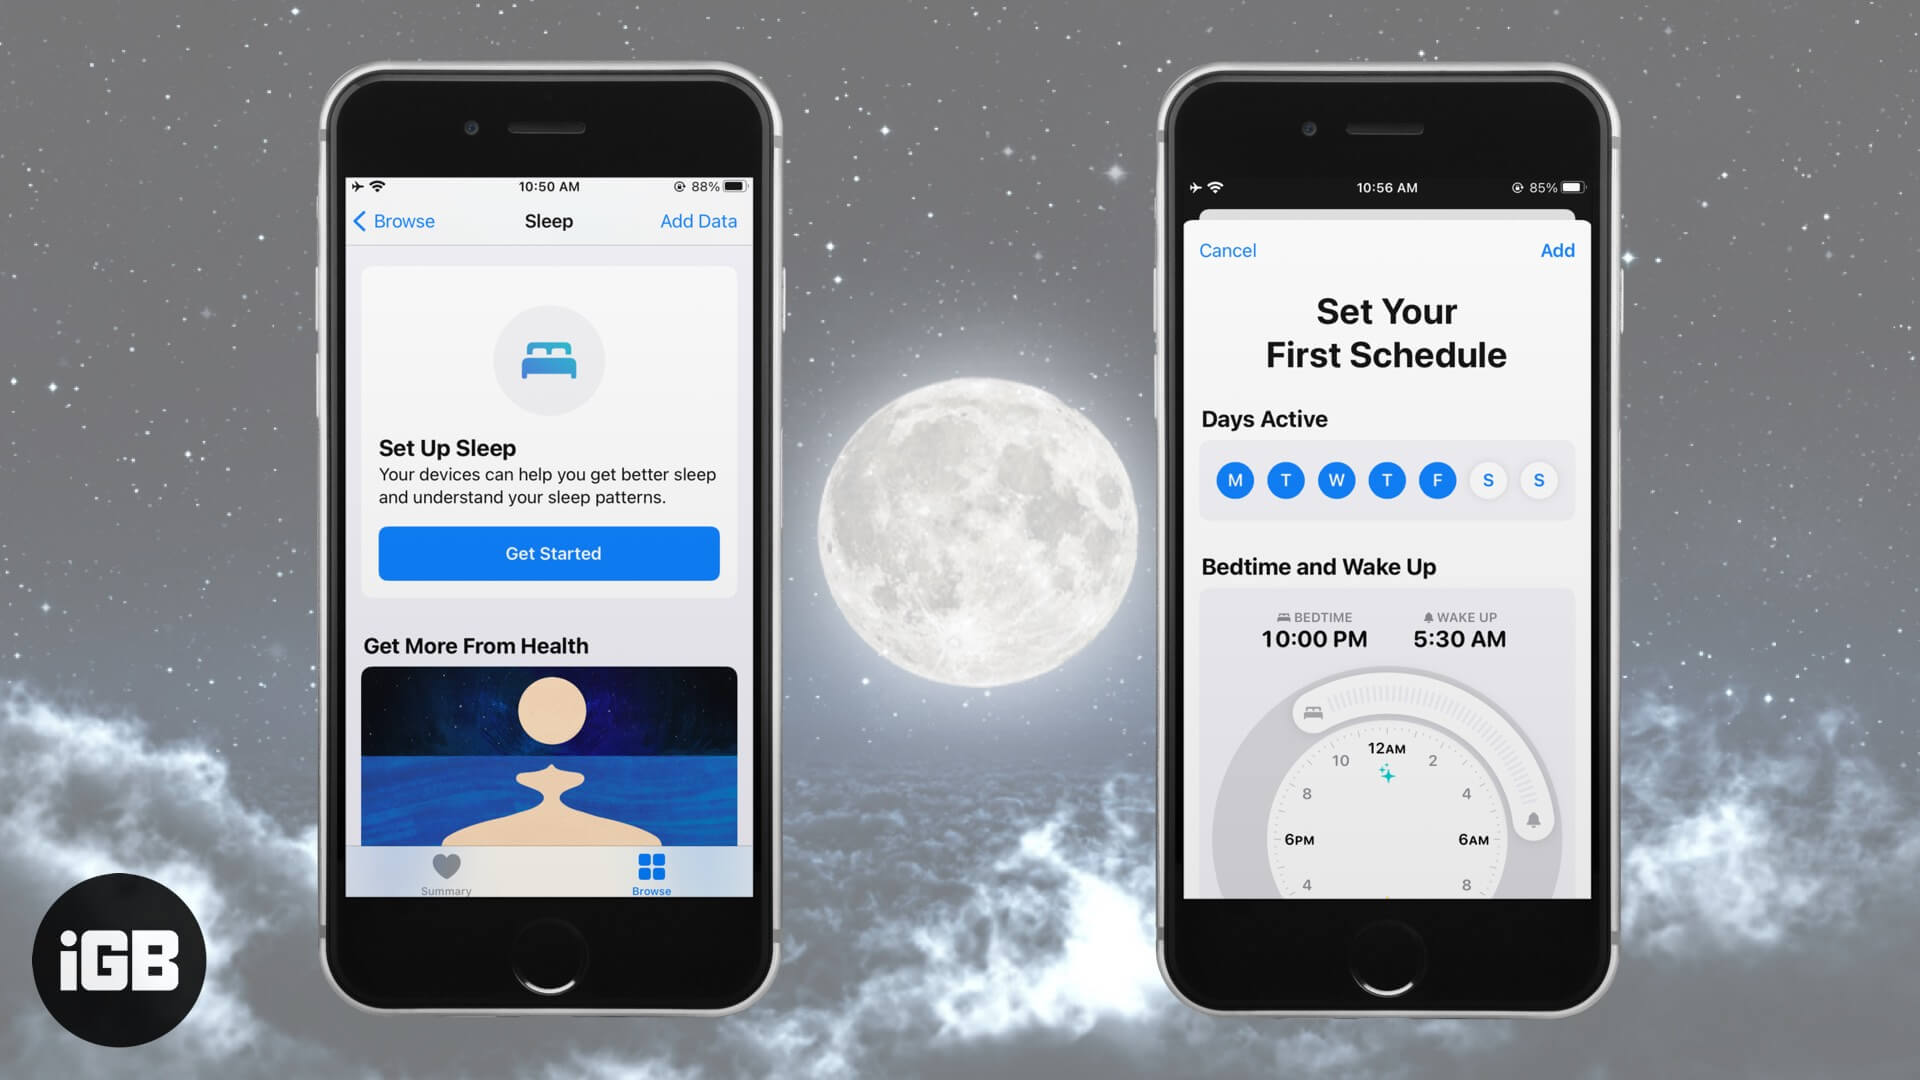 How to use bedtime on iphone to track your sleep